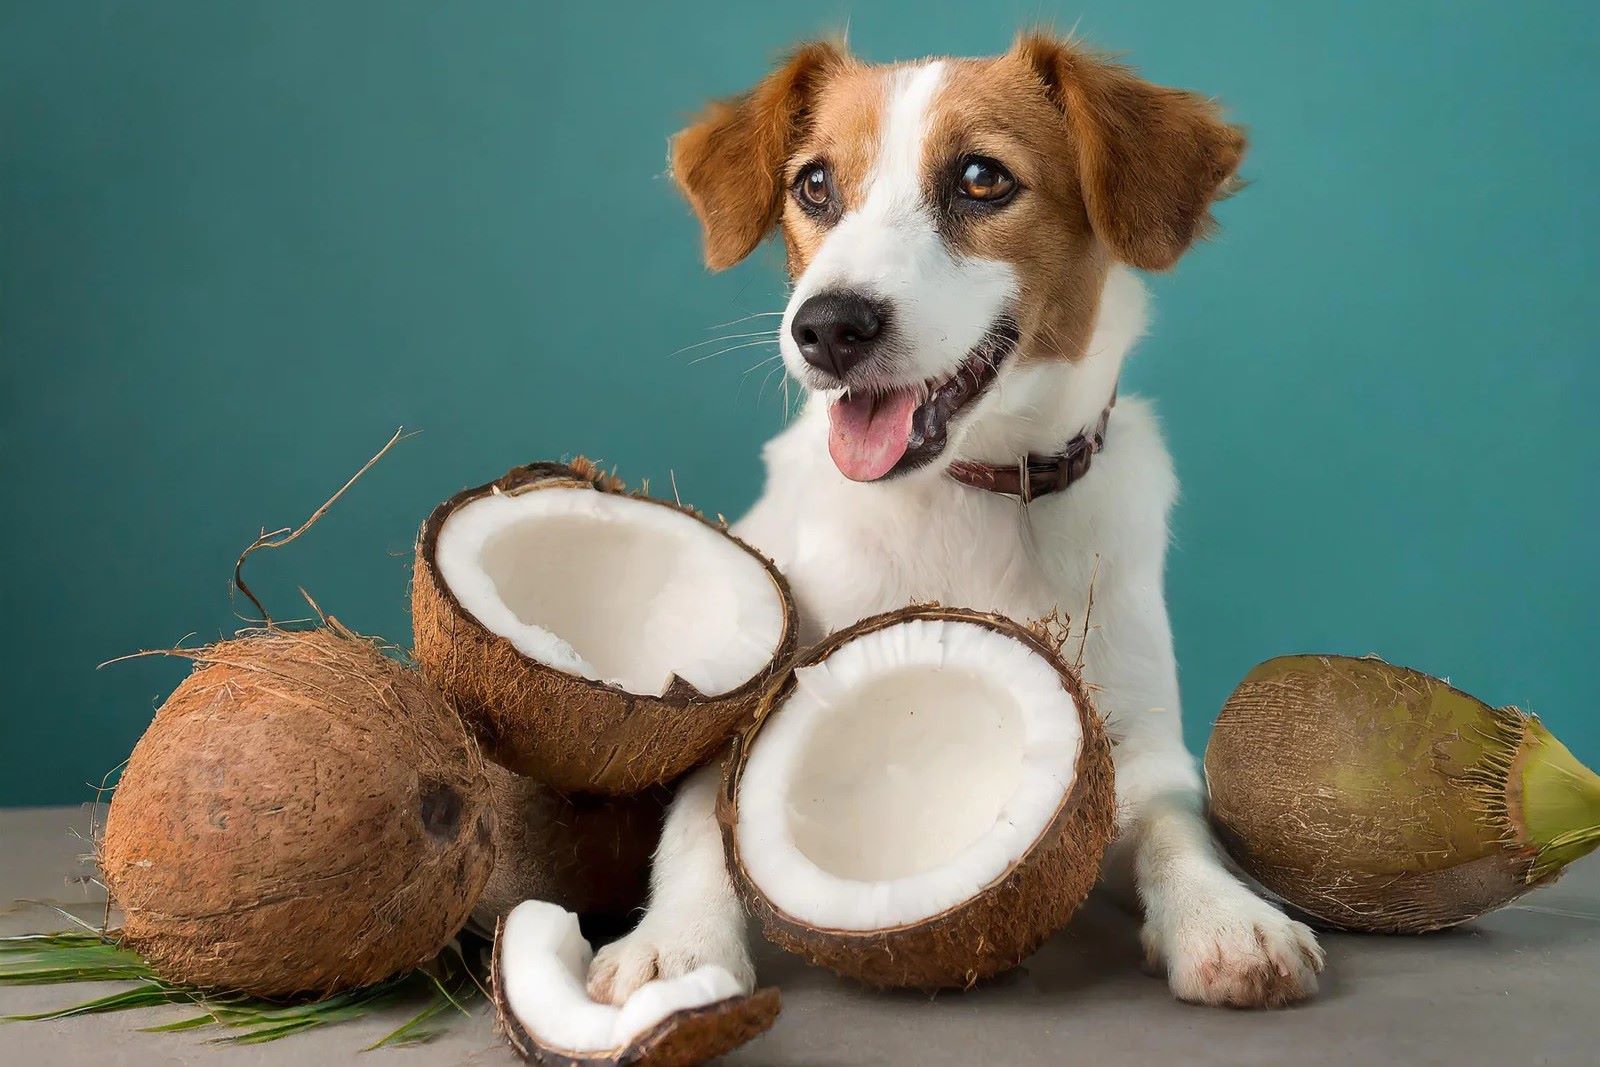 Surprising Truth: Dogs And Coconut – A Perfect Match!